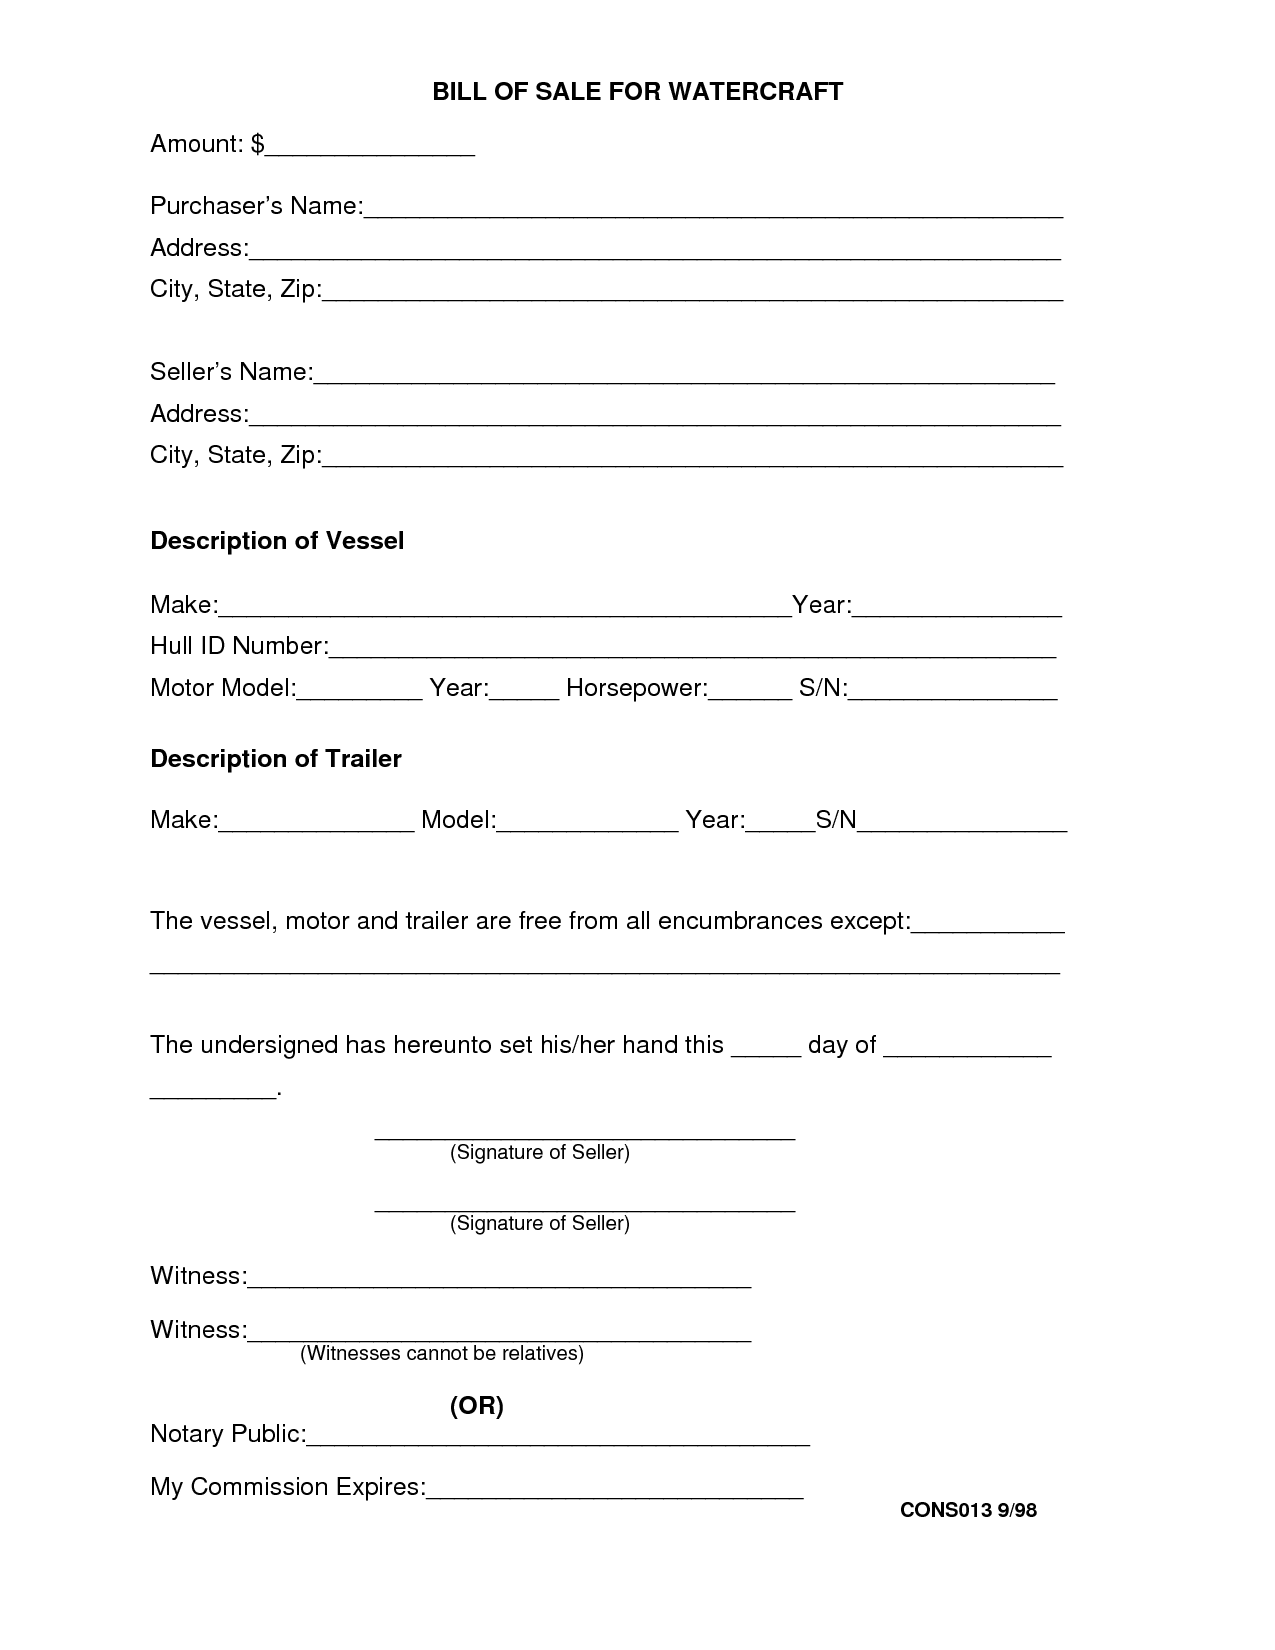 travel-trailer-bill-of-sale-form-free-printable-documents